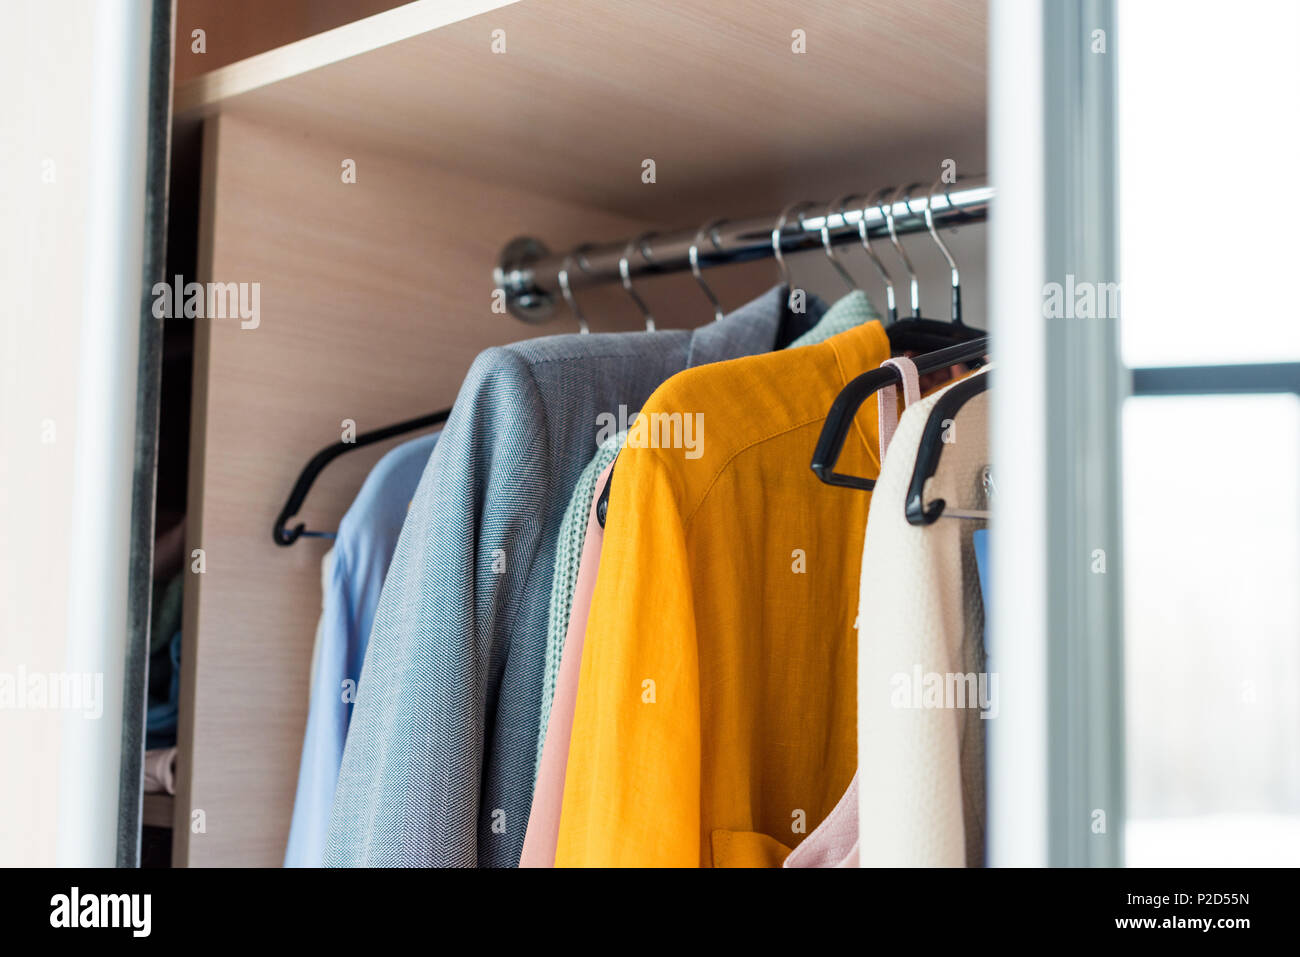 Colorful Female Clothes Hanging On Rack In Cabinet Stock Photo